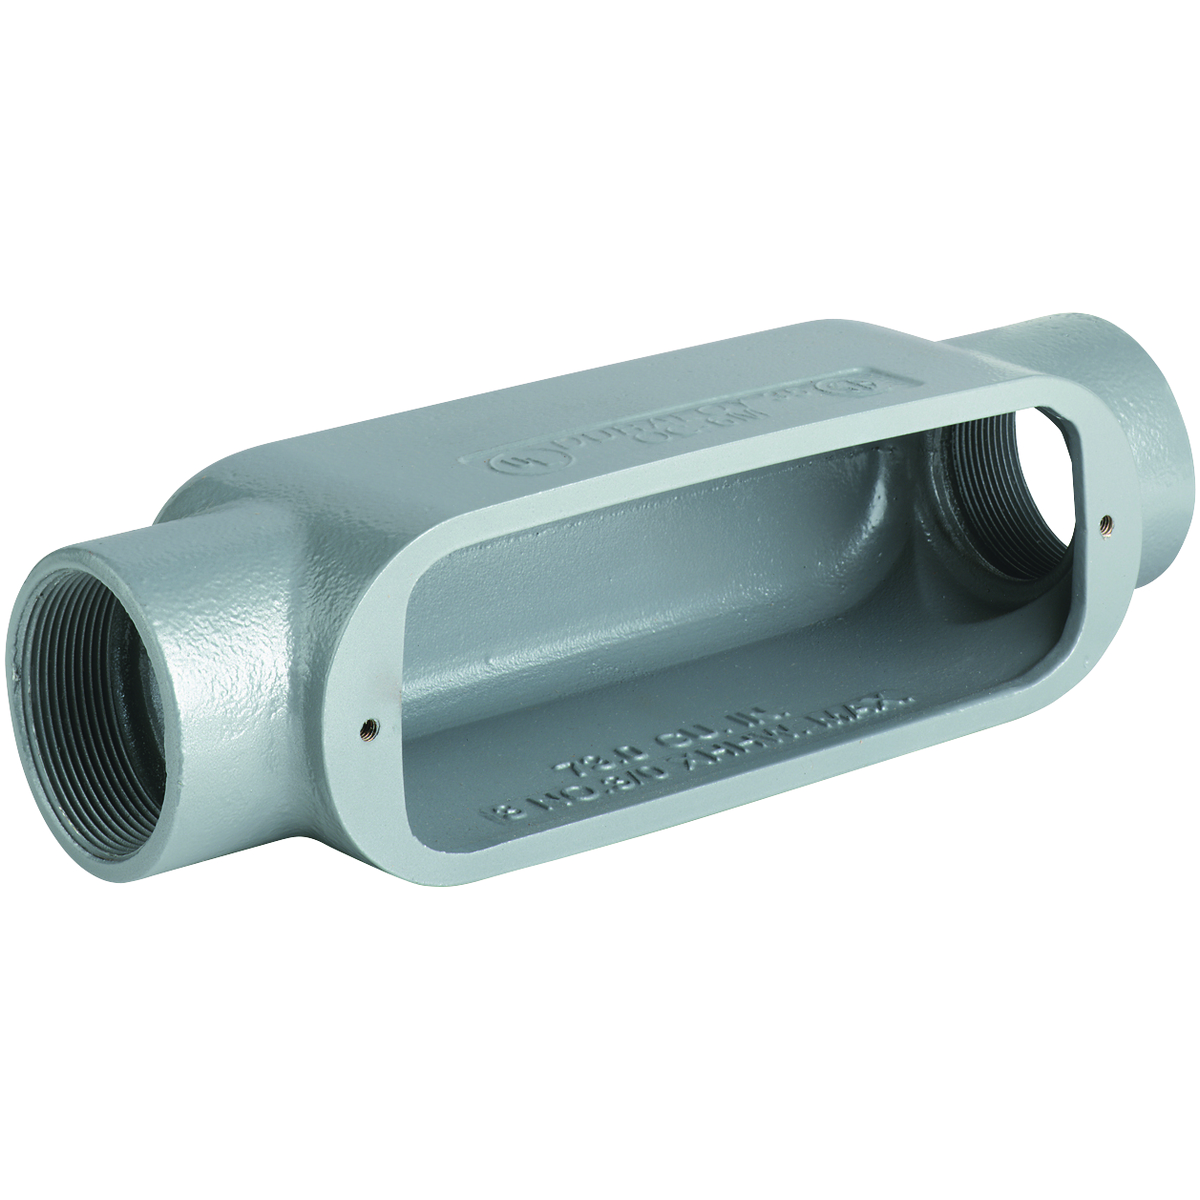 O SERIES/DURALOY 5 SERIES - ALUMINUM CONDUIT BODY - C TYPE - HUB SIZE 3INCH - VOLUME 181.0 CUBIC INCHES